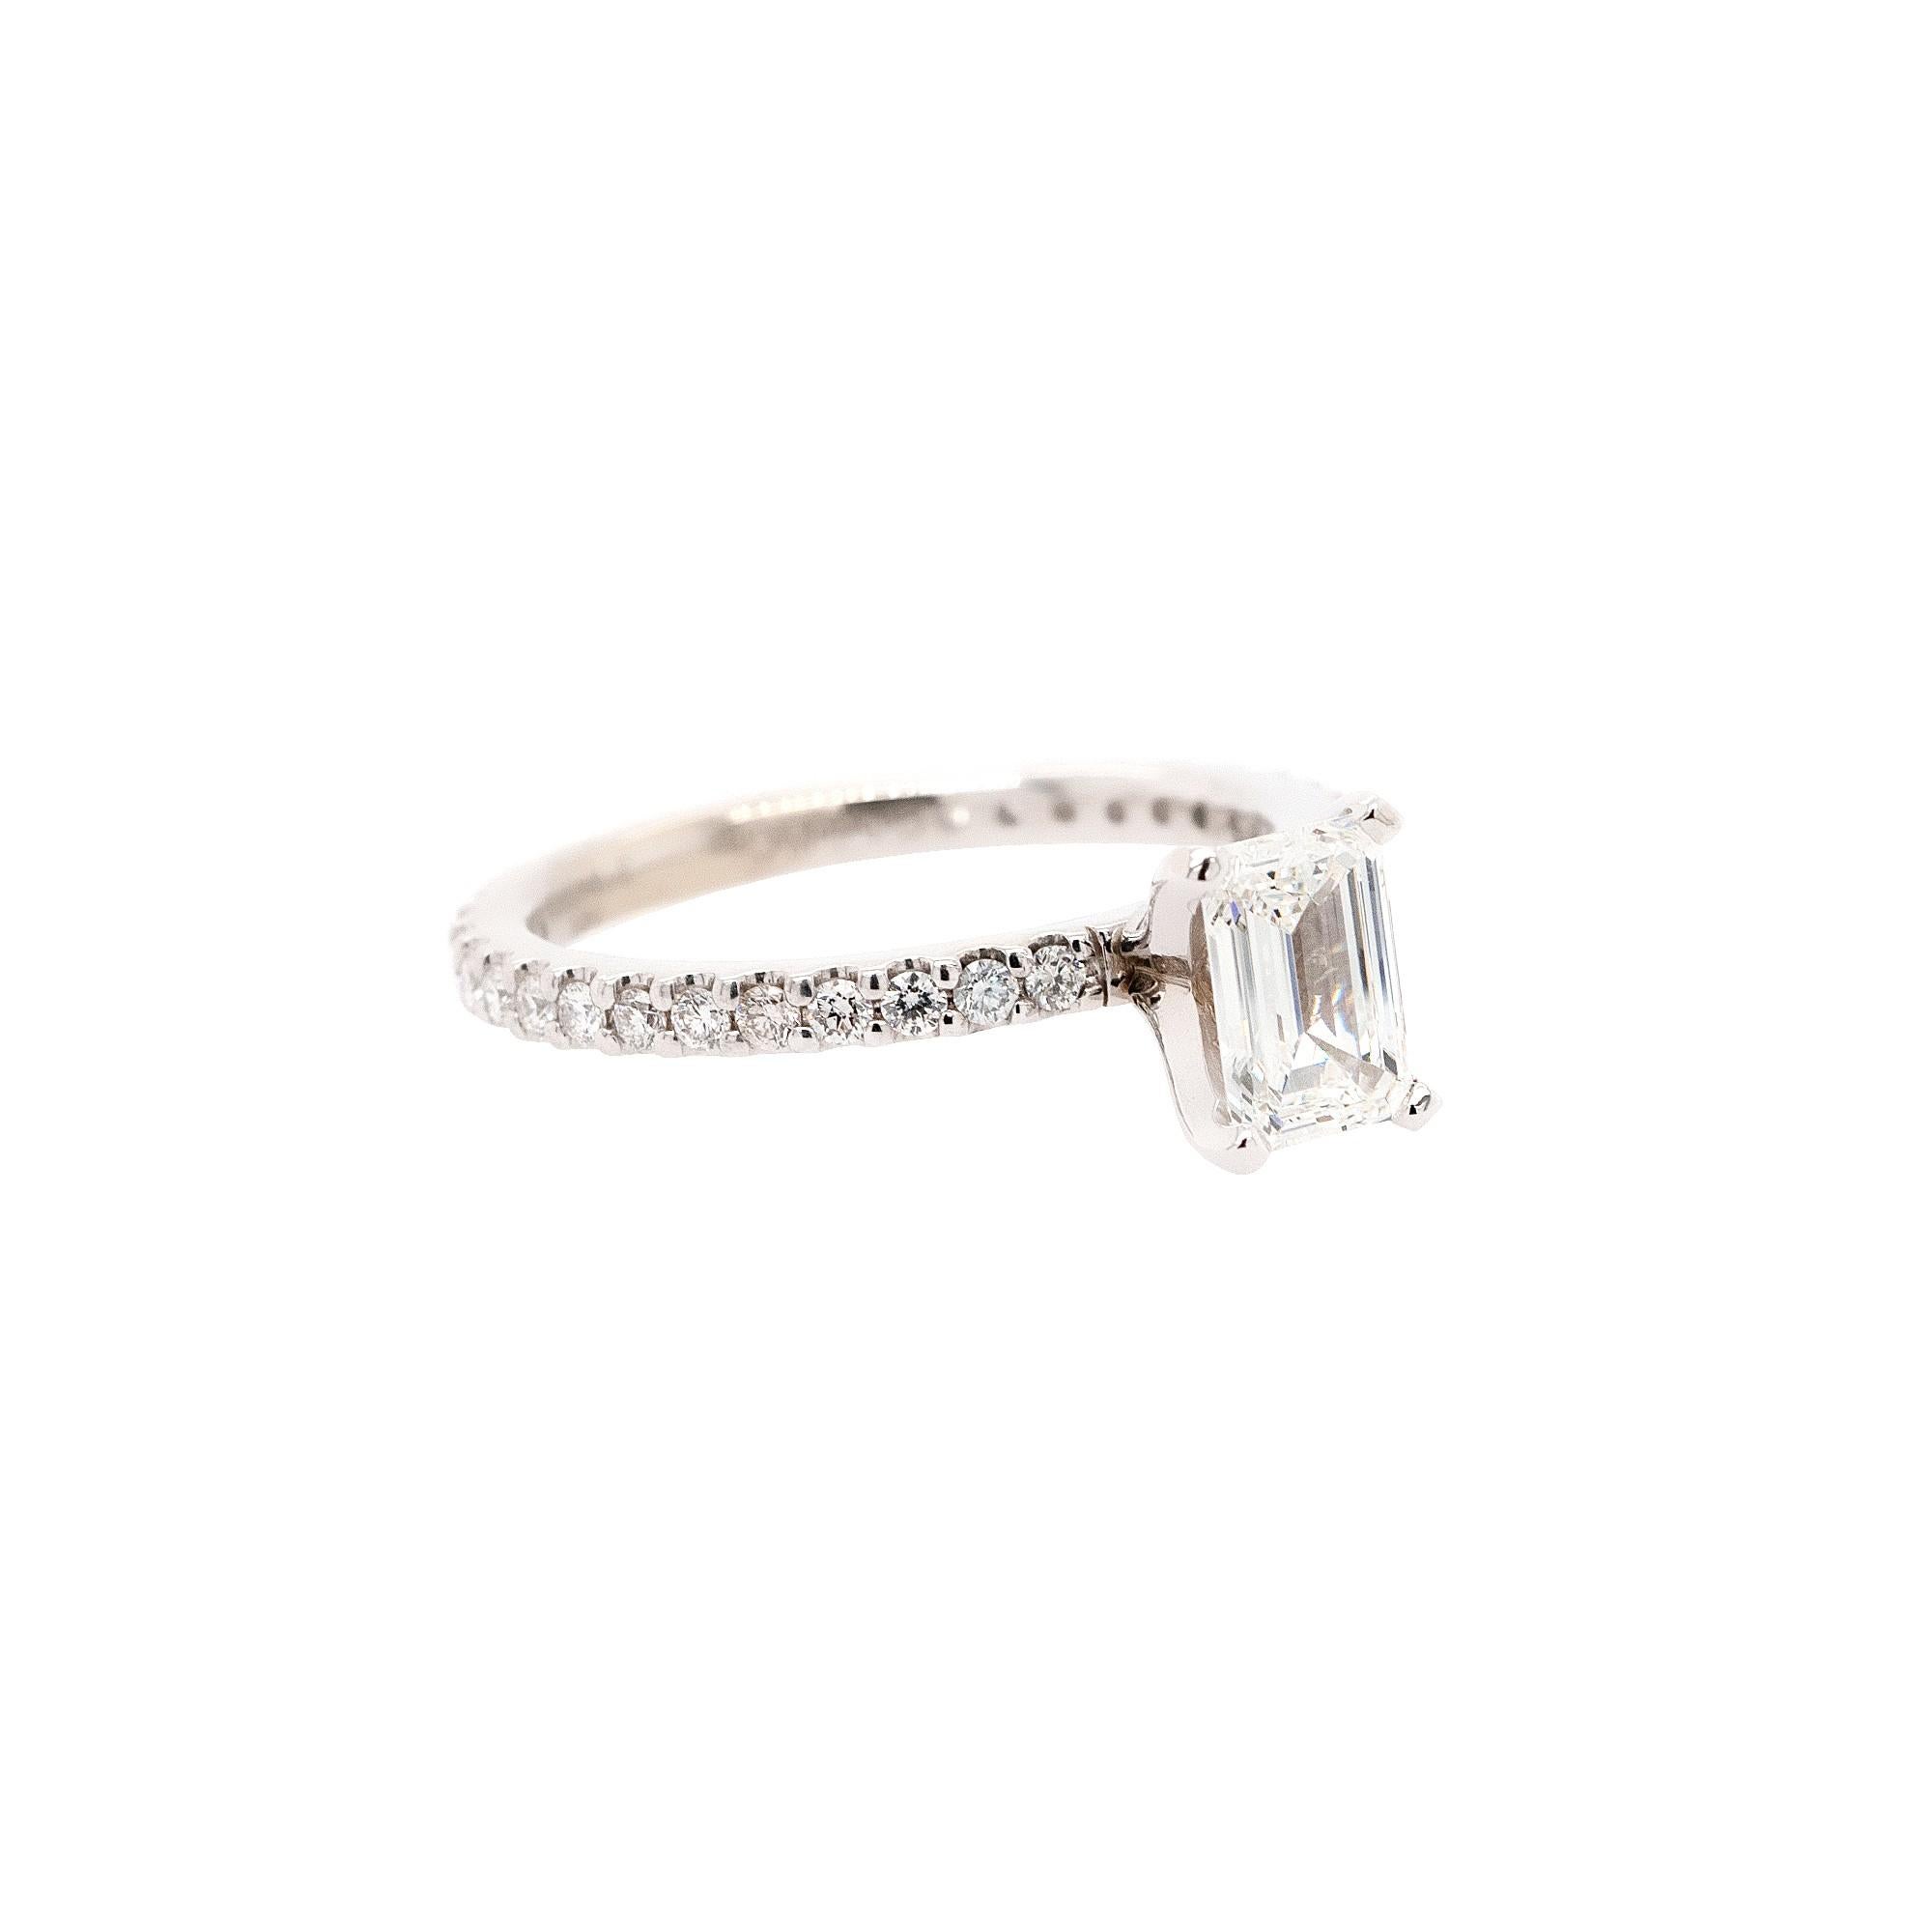 0.90 Carat GIA Emerald Cut Diamond Engagement Ring For Sale 1